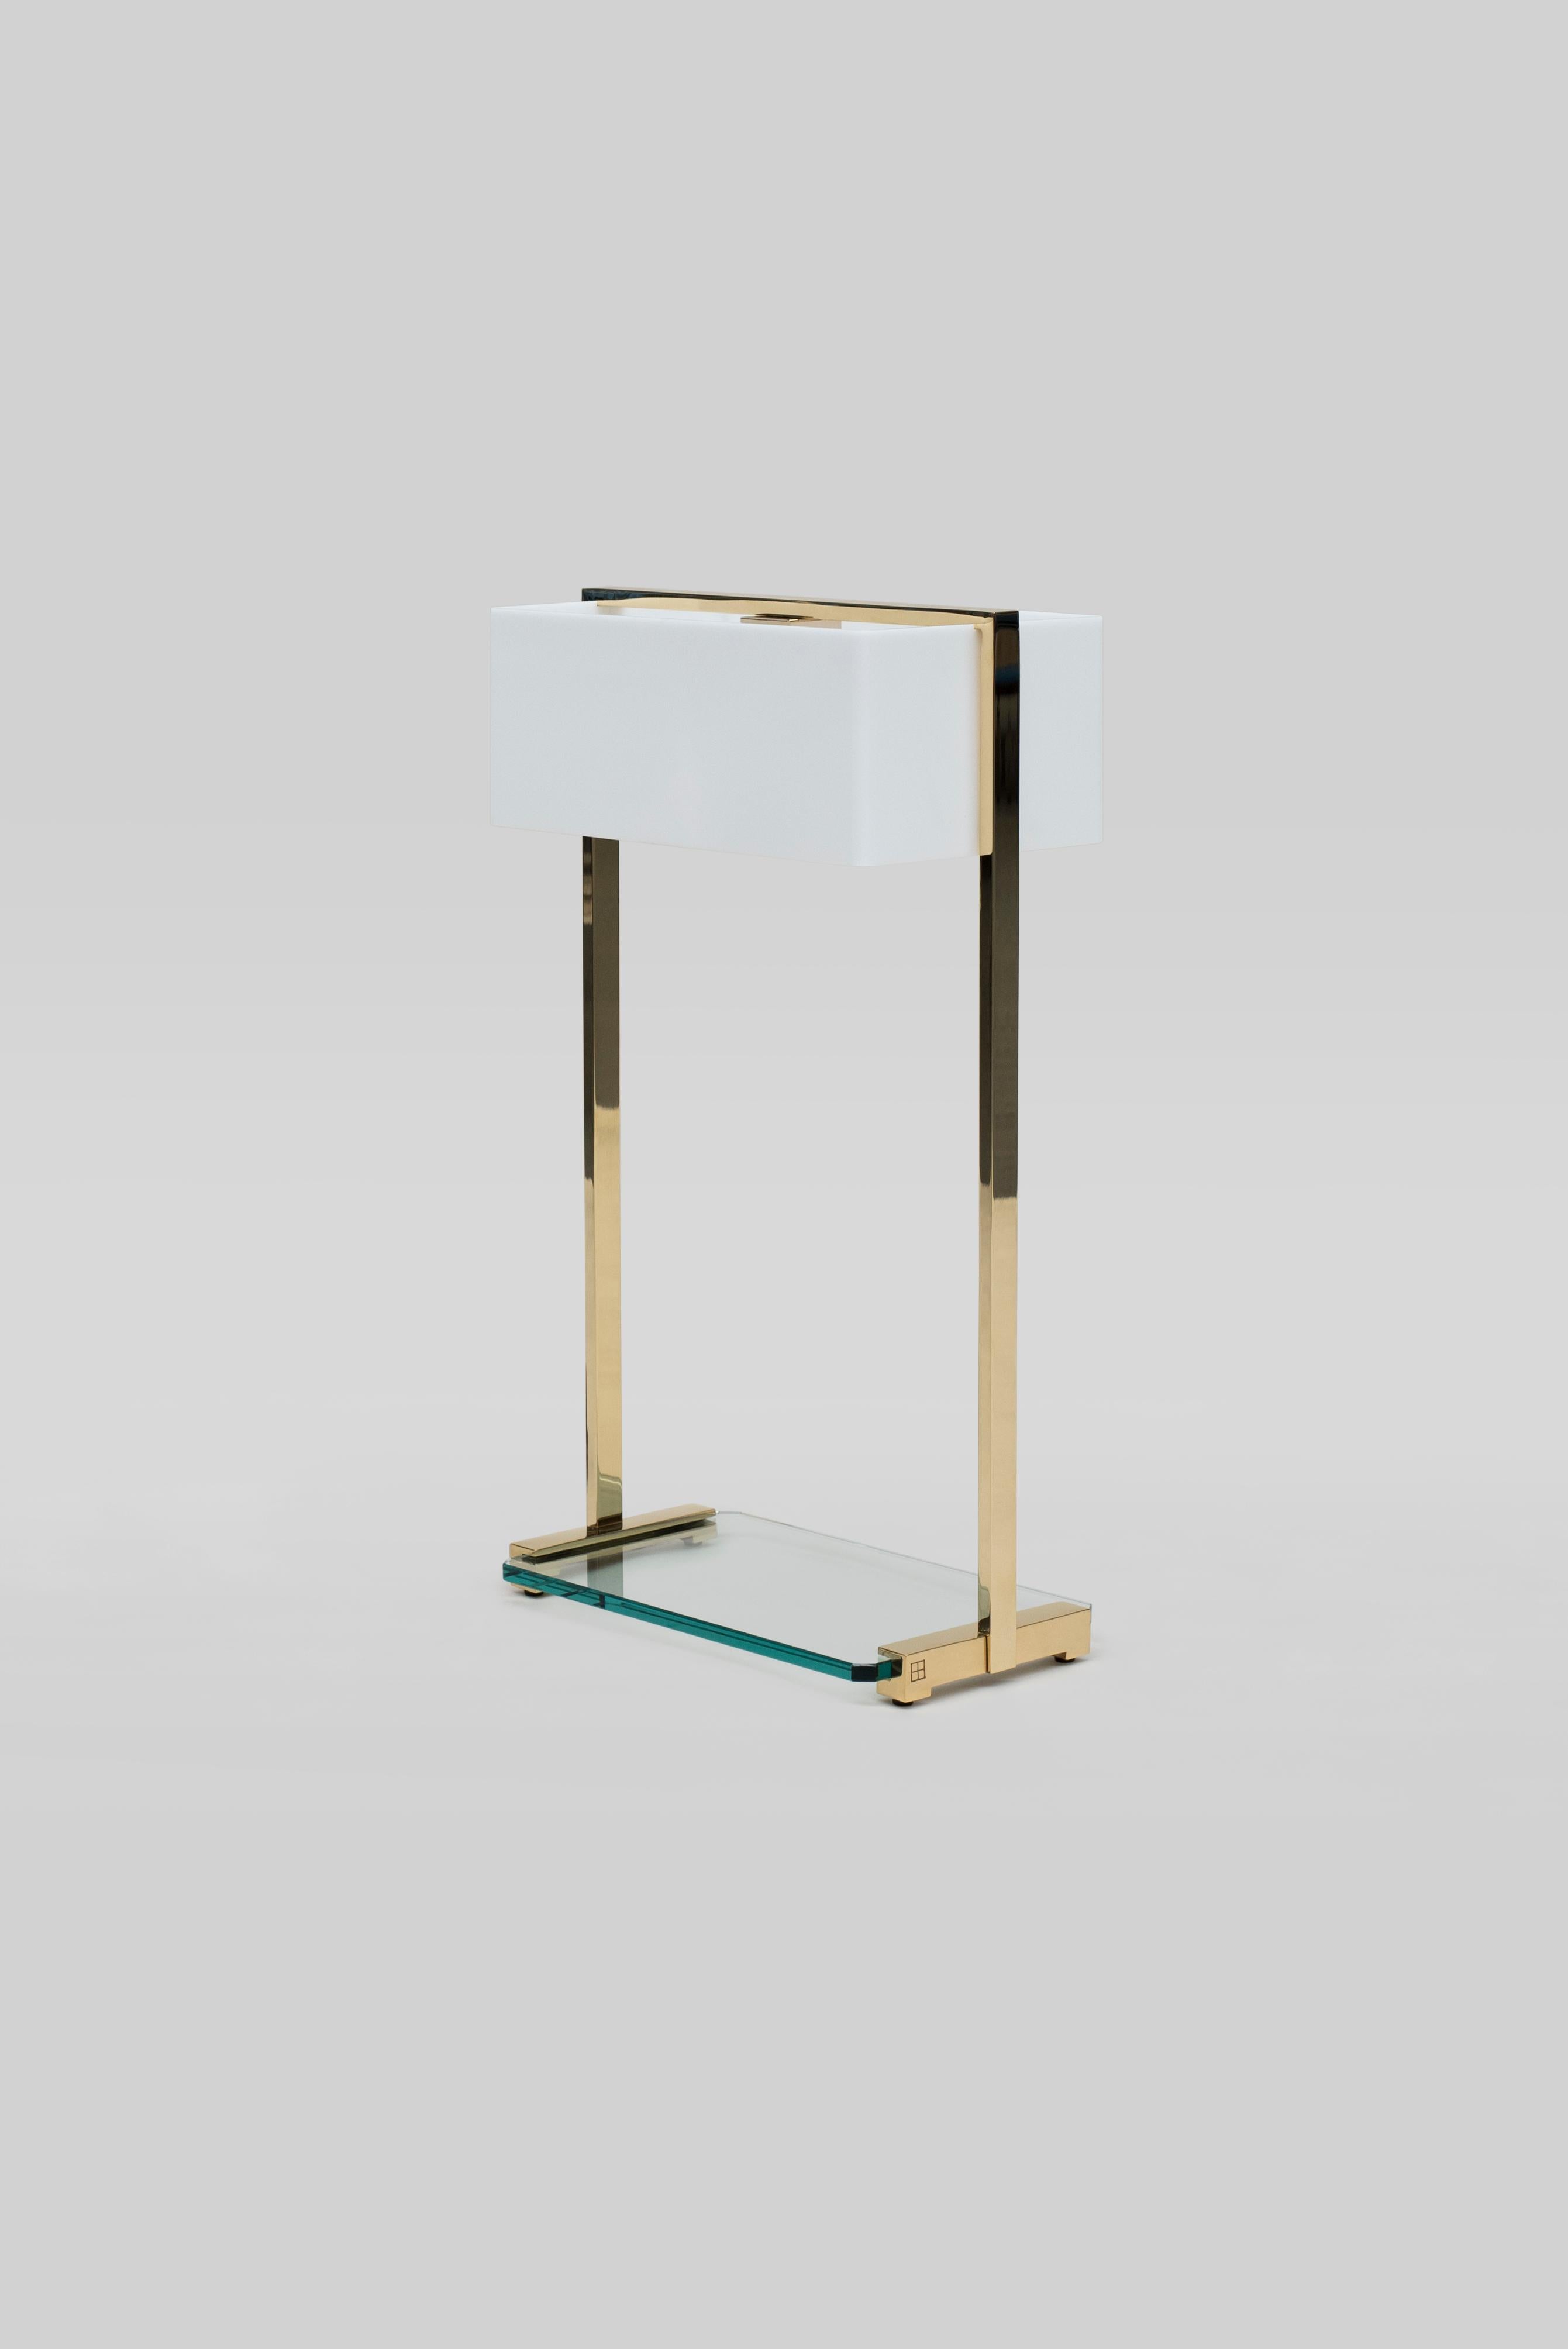 This 21st century minimalist Tom MW10 table lamp was designed by Peter Ghyczy in 2006 and hand-crafted in the GHYCYZ atelier in the south of the Netherlands, with a select group of artisans. The polished and glossy brass frame is made of 1 x 2 cm